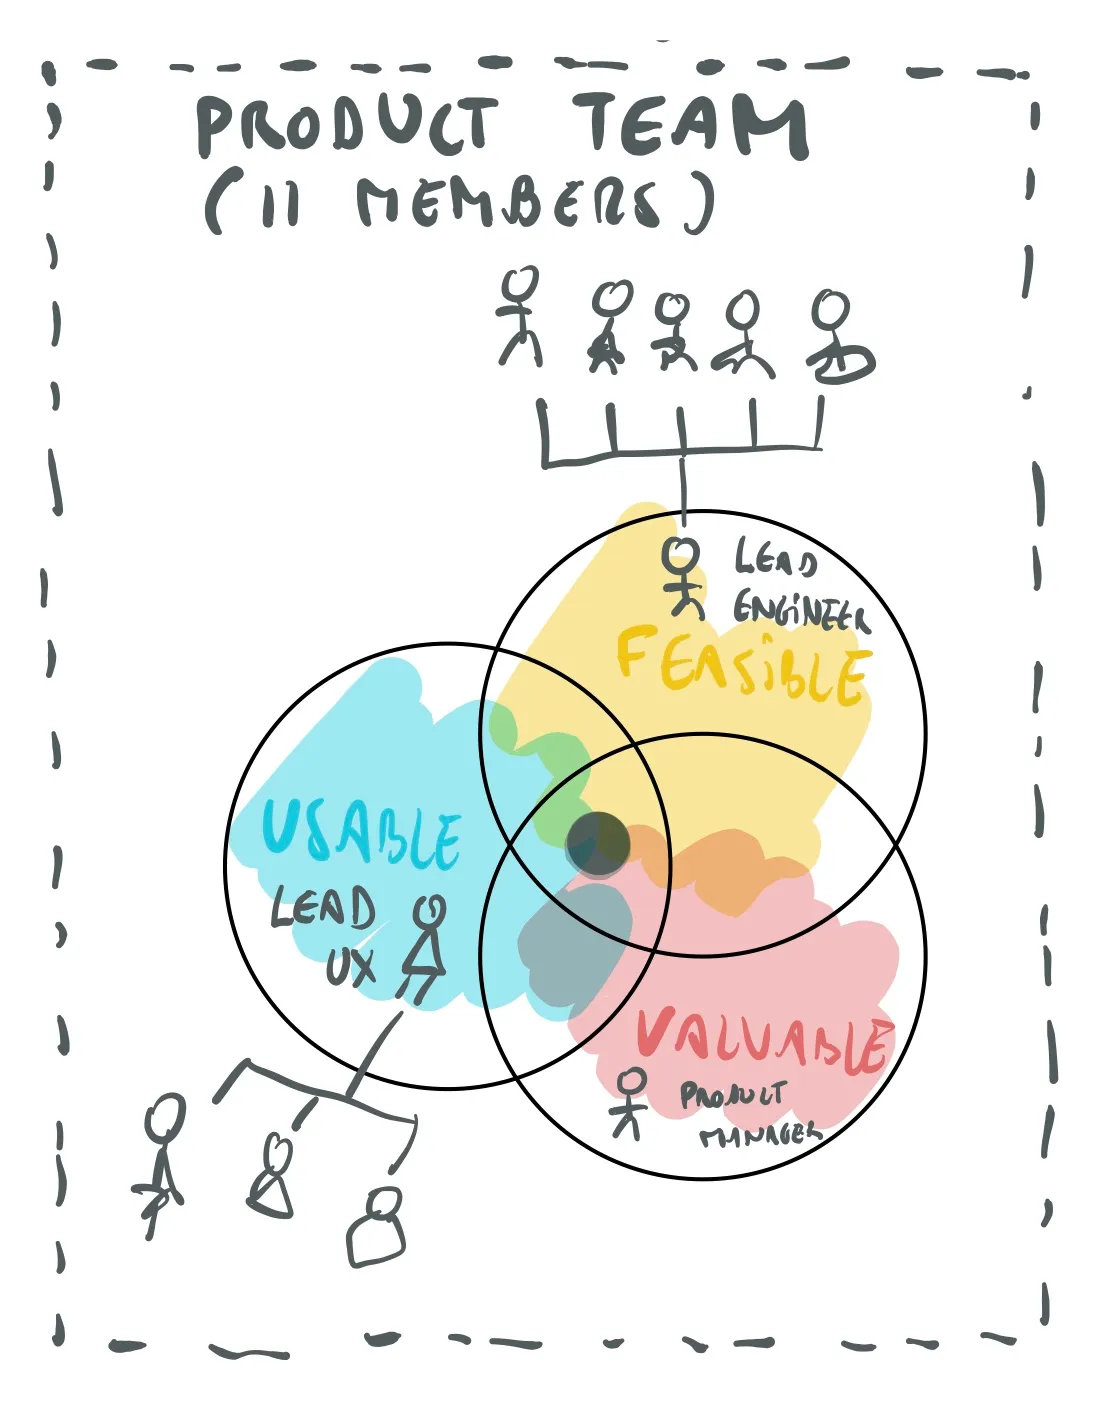 Typical trifecta and product team composition Illustration by the author